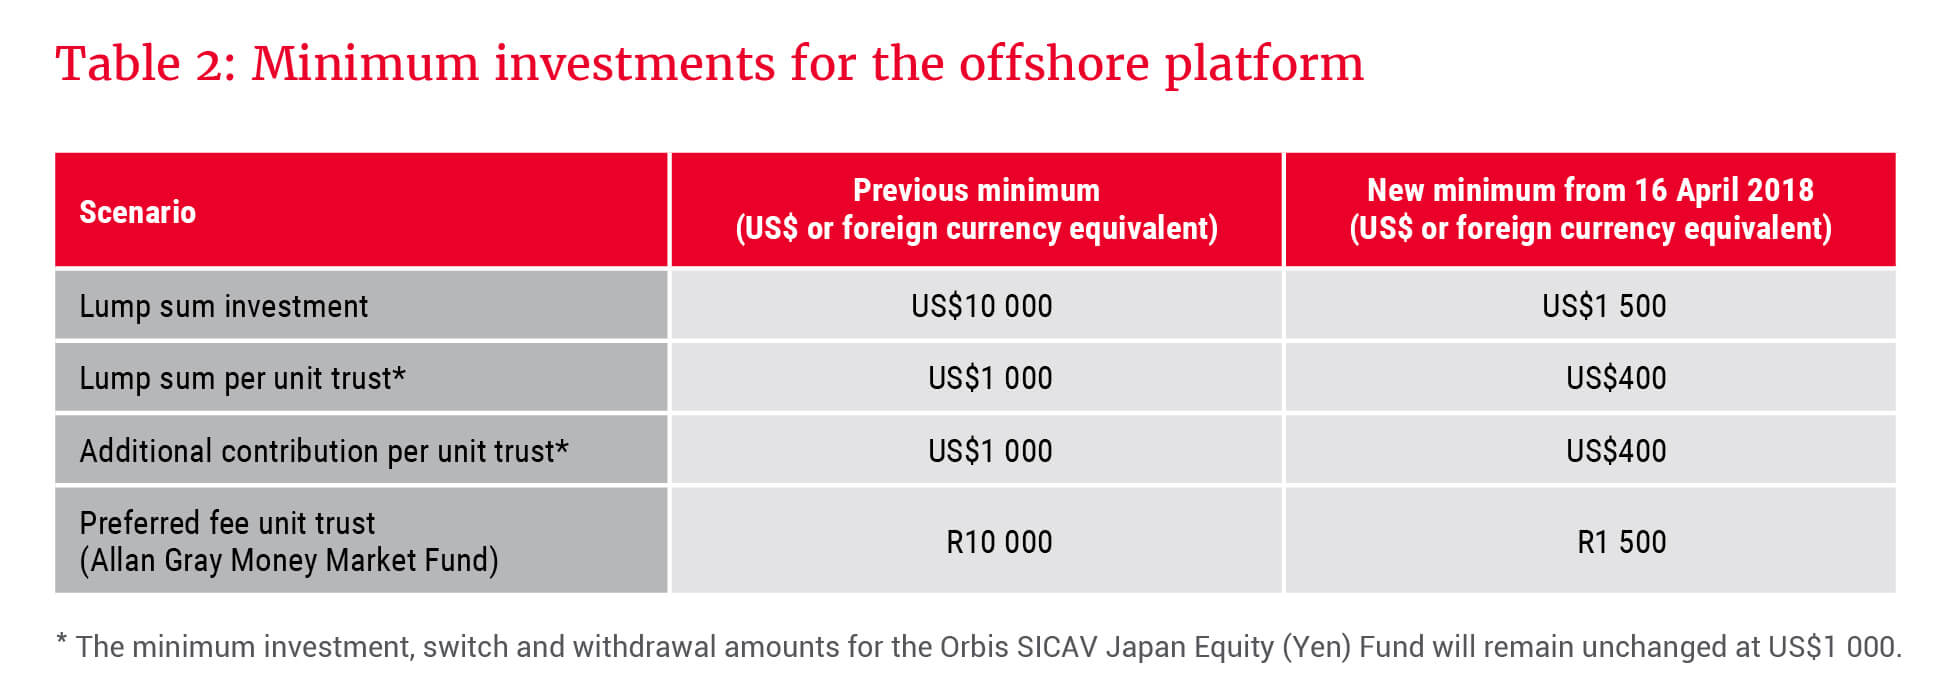 Minimum investments for the Allan Gray offshore platform